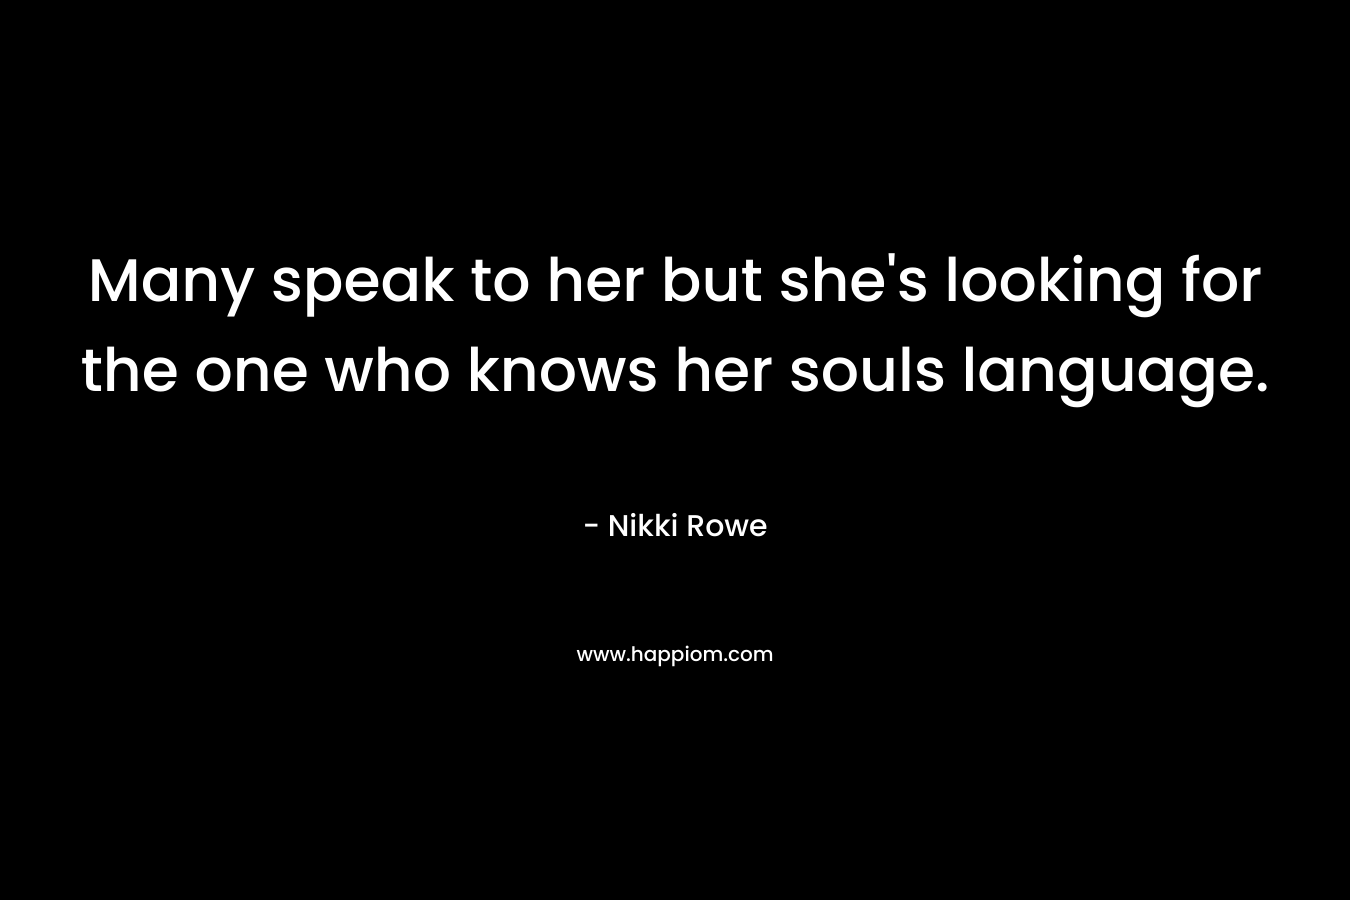 Many speak to her but she's looking for the one who knows her souls language.